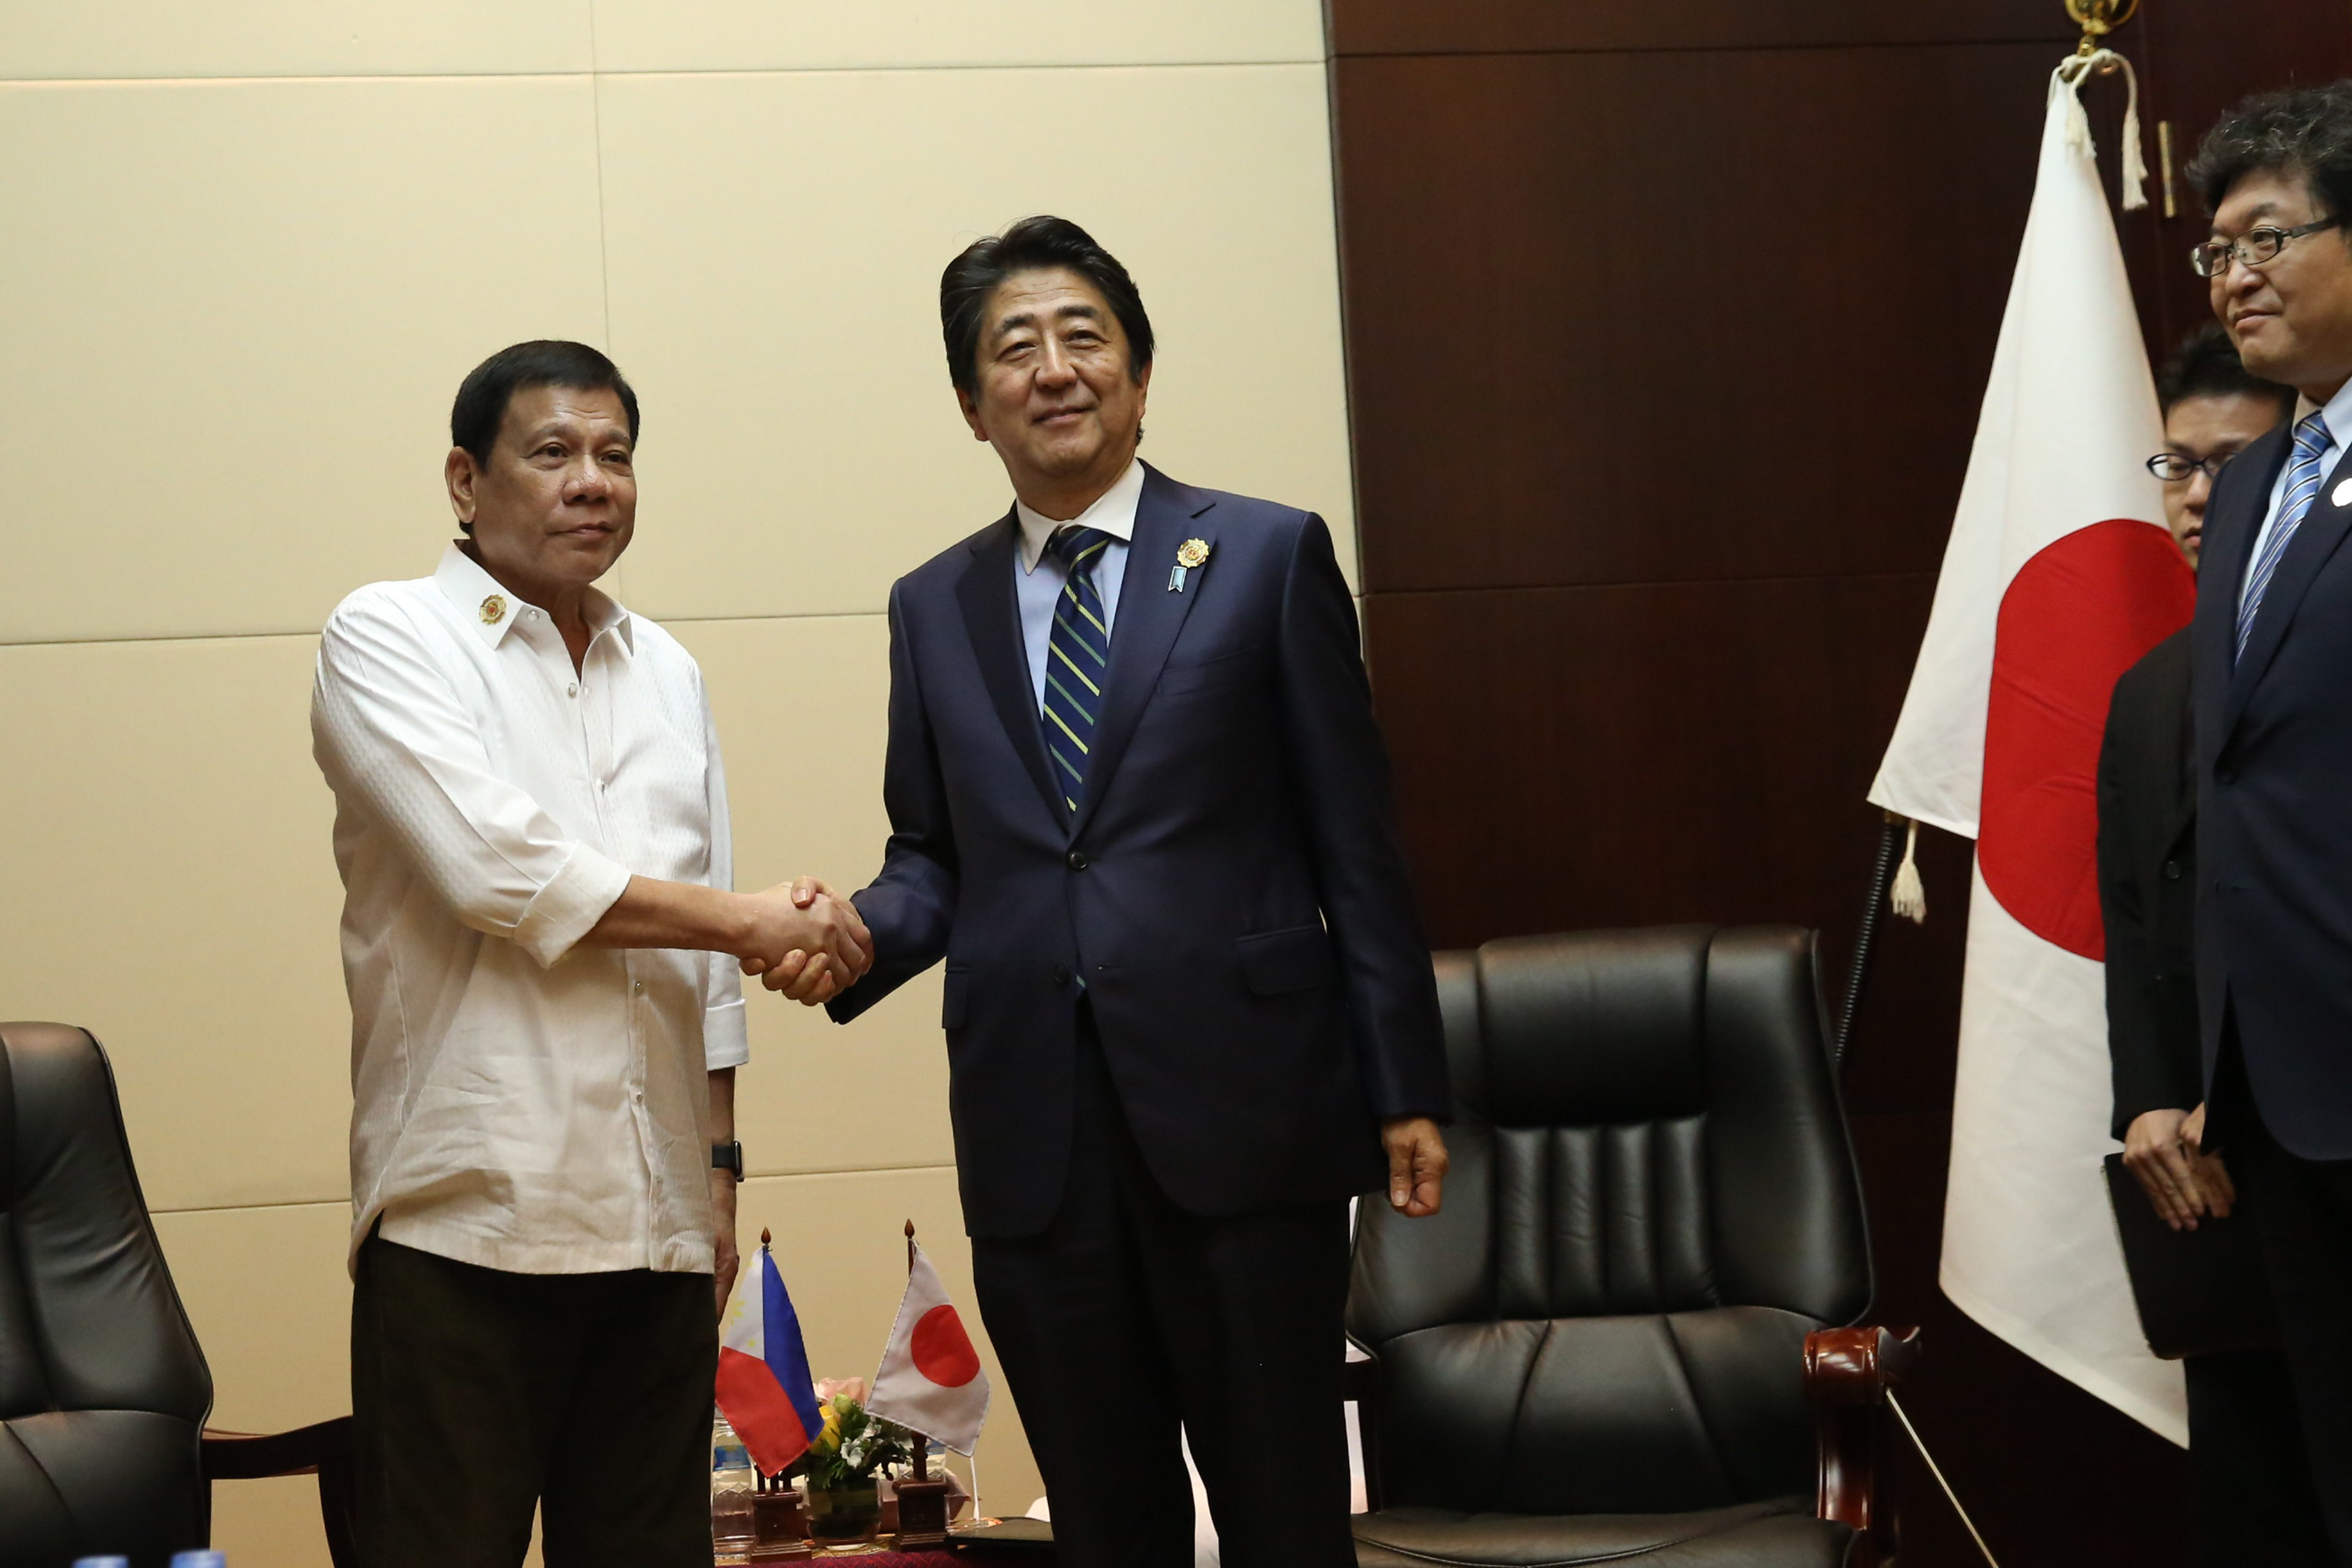 INVITATION TO JAPAN. President Rodrigo Duterte and Prime Minister Shinzo Abe meet in Vientiane, Laos during the ASEAN Summit in early September 2016. Photo from PPD 